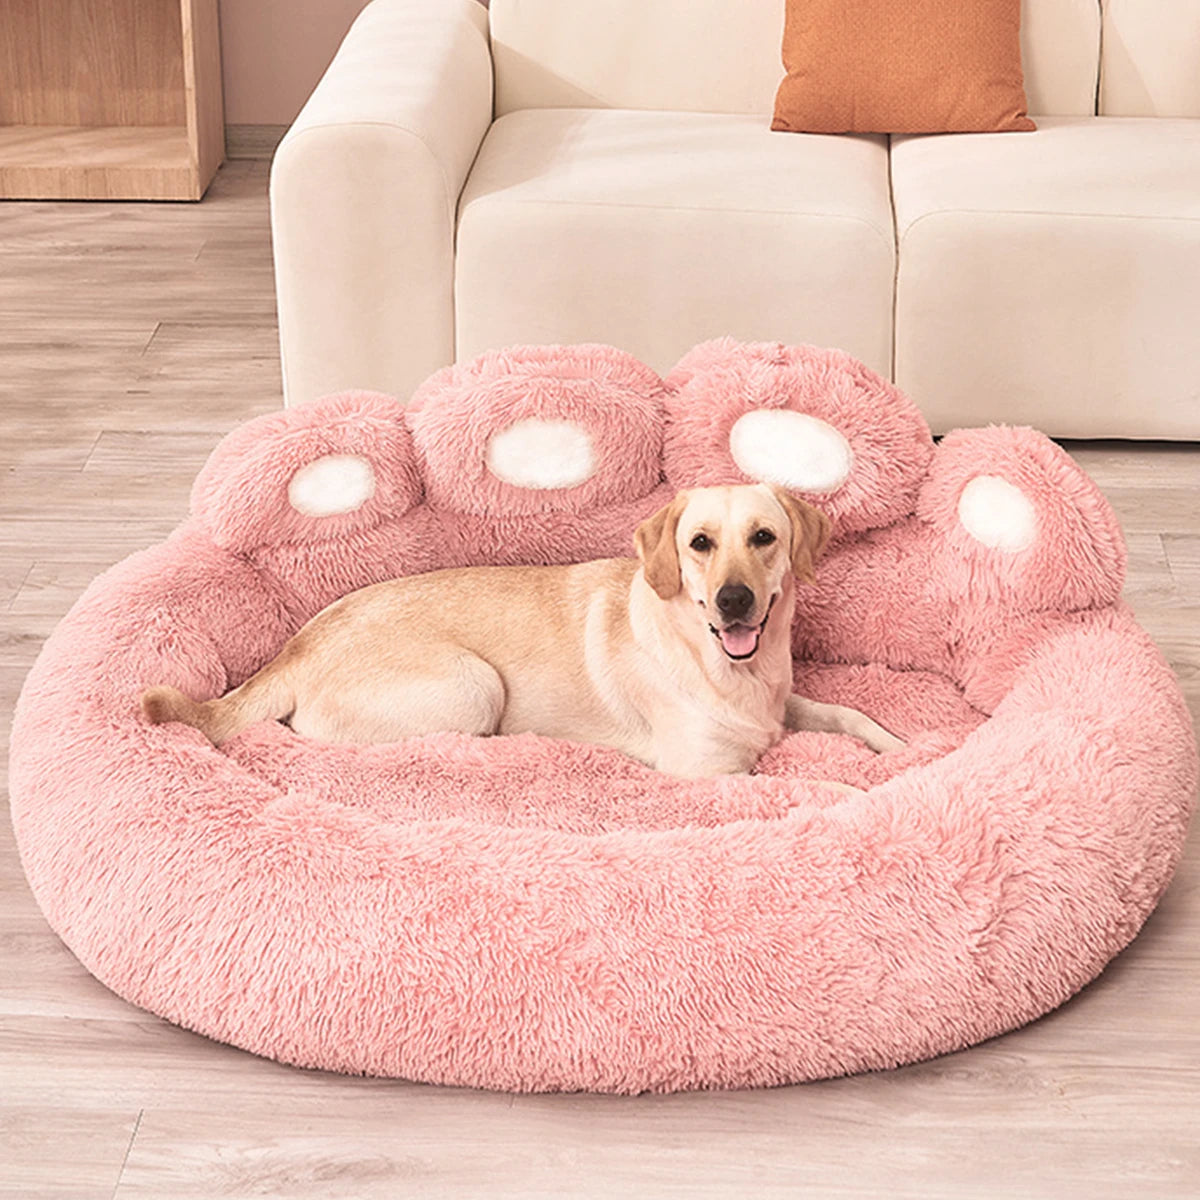 Paw-Shaped Fluffy Pet Bed